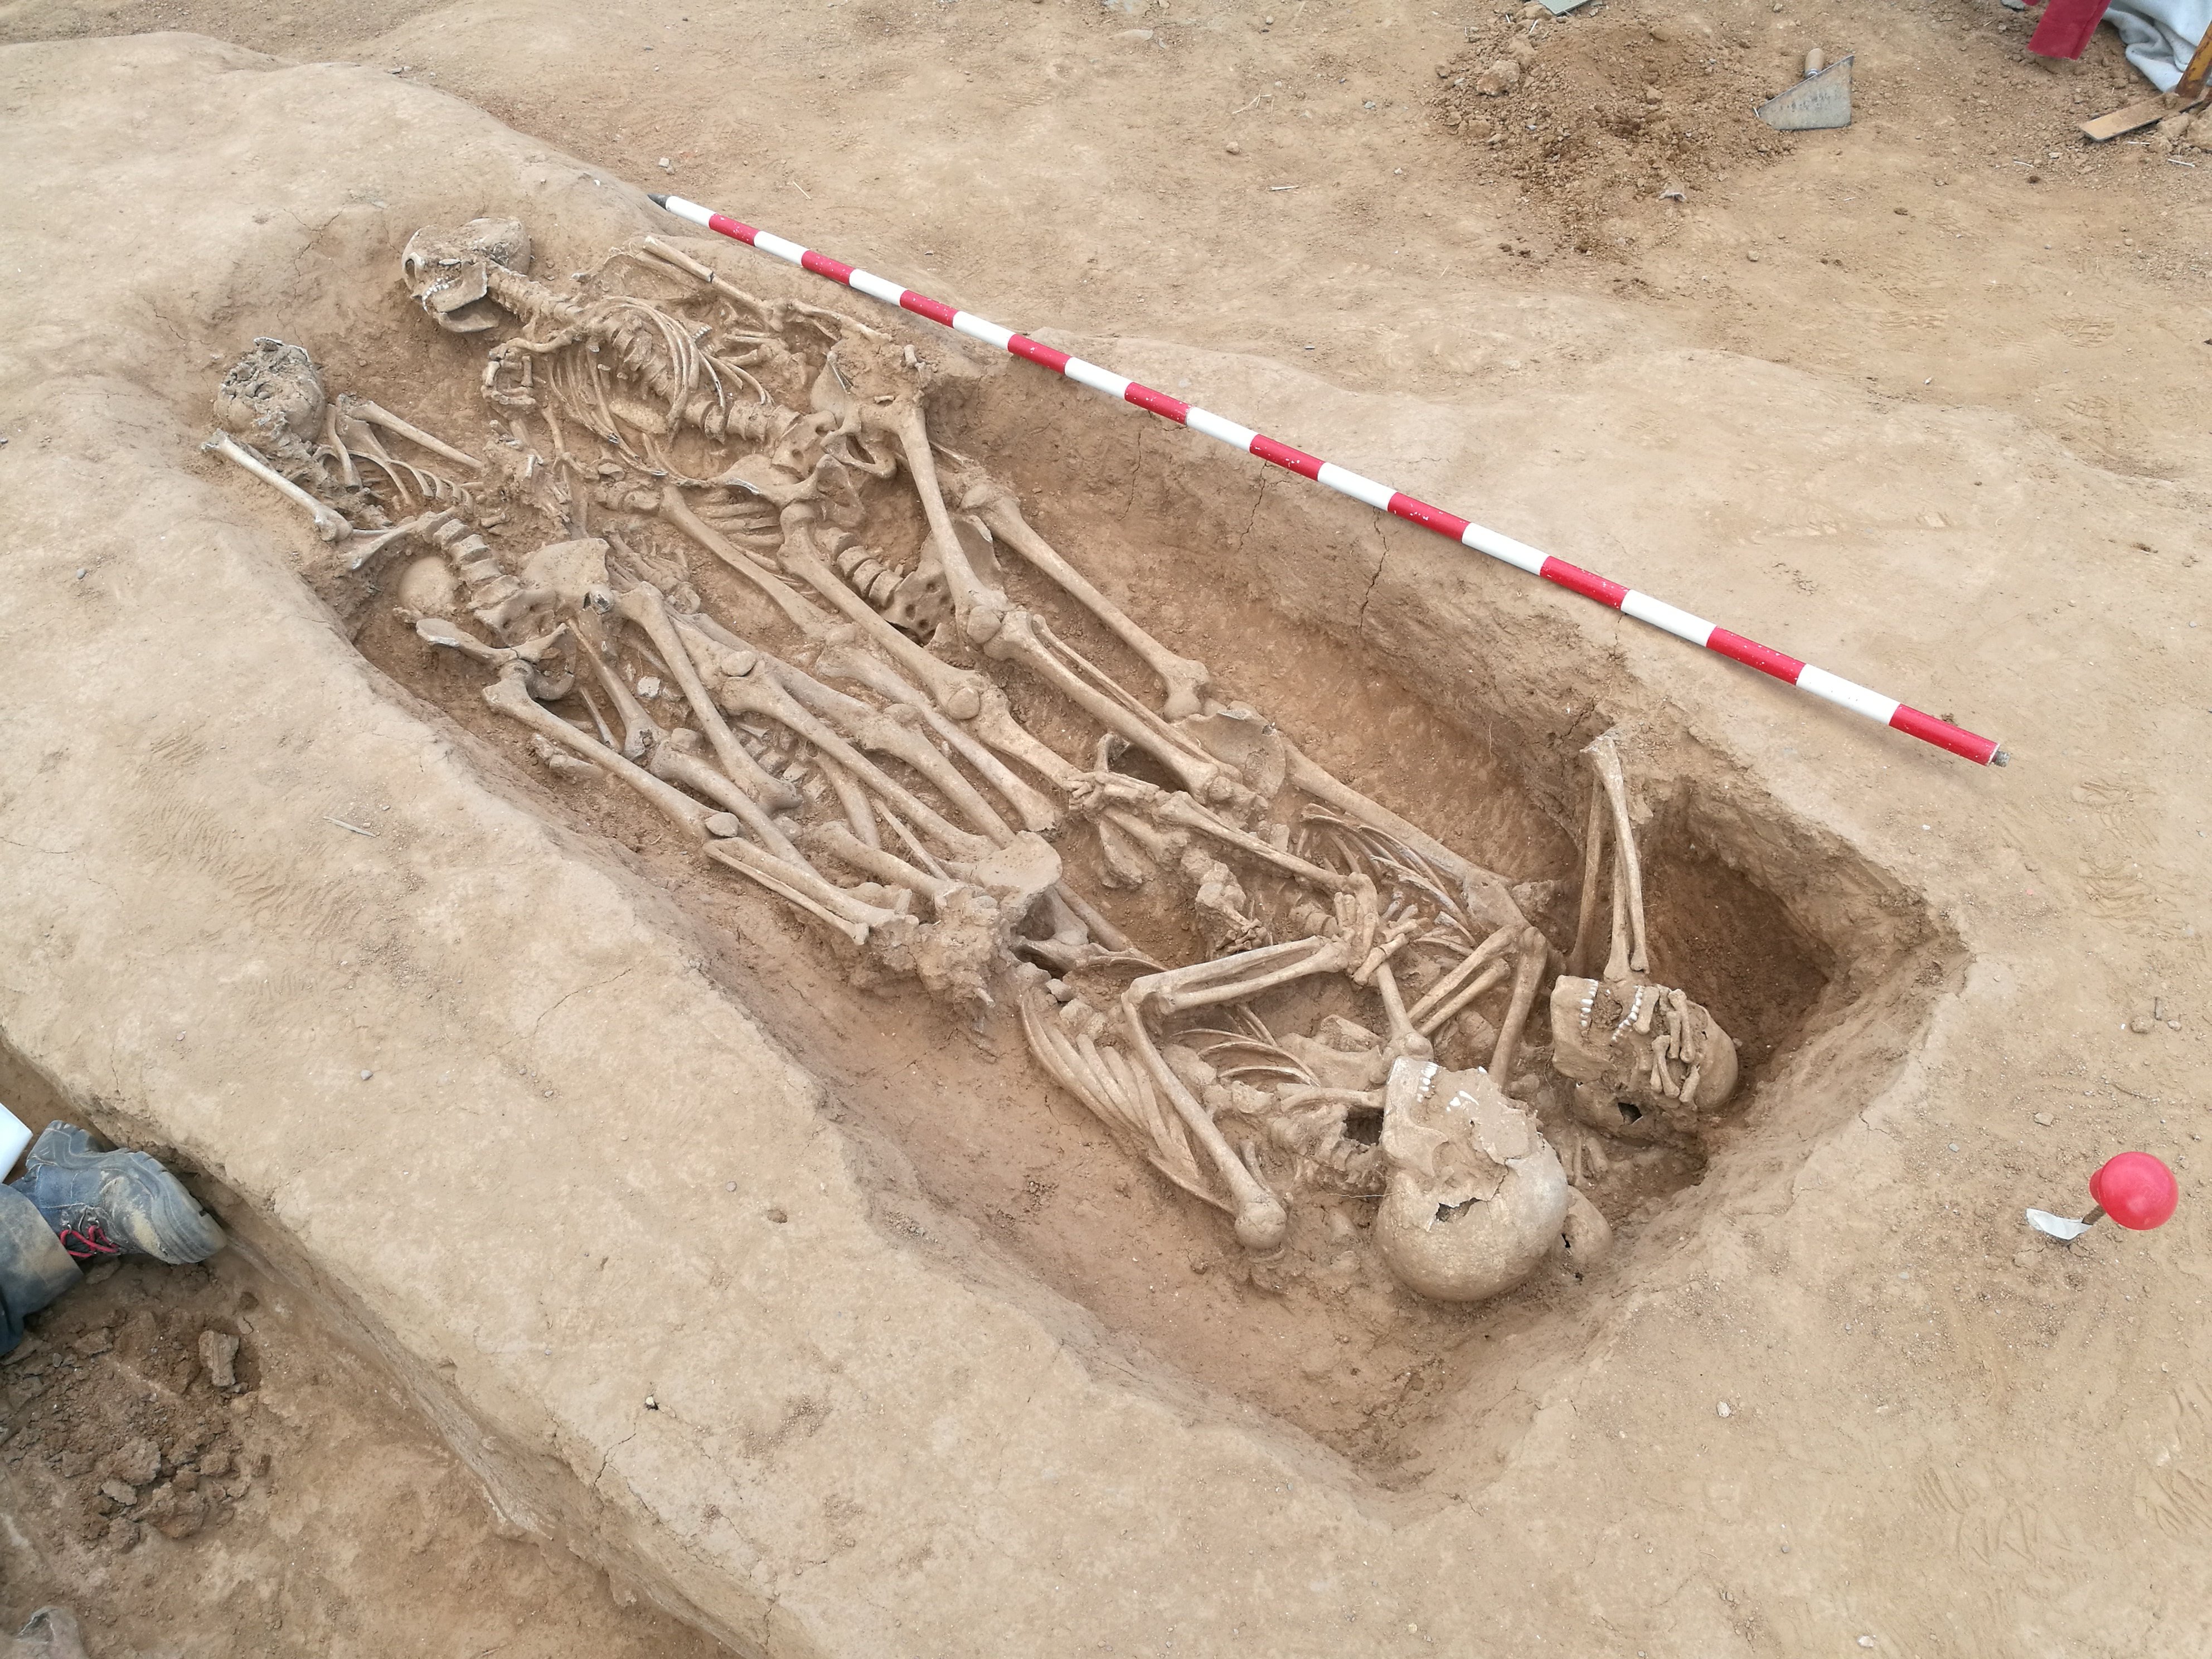 Bodies of hundreds of 17th century soldiers found in Barcelona